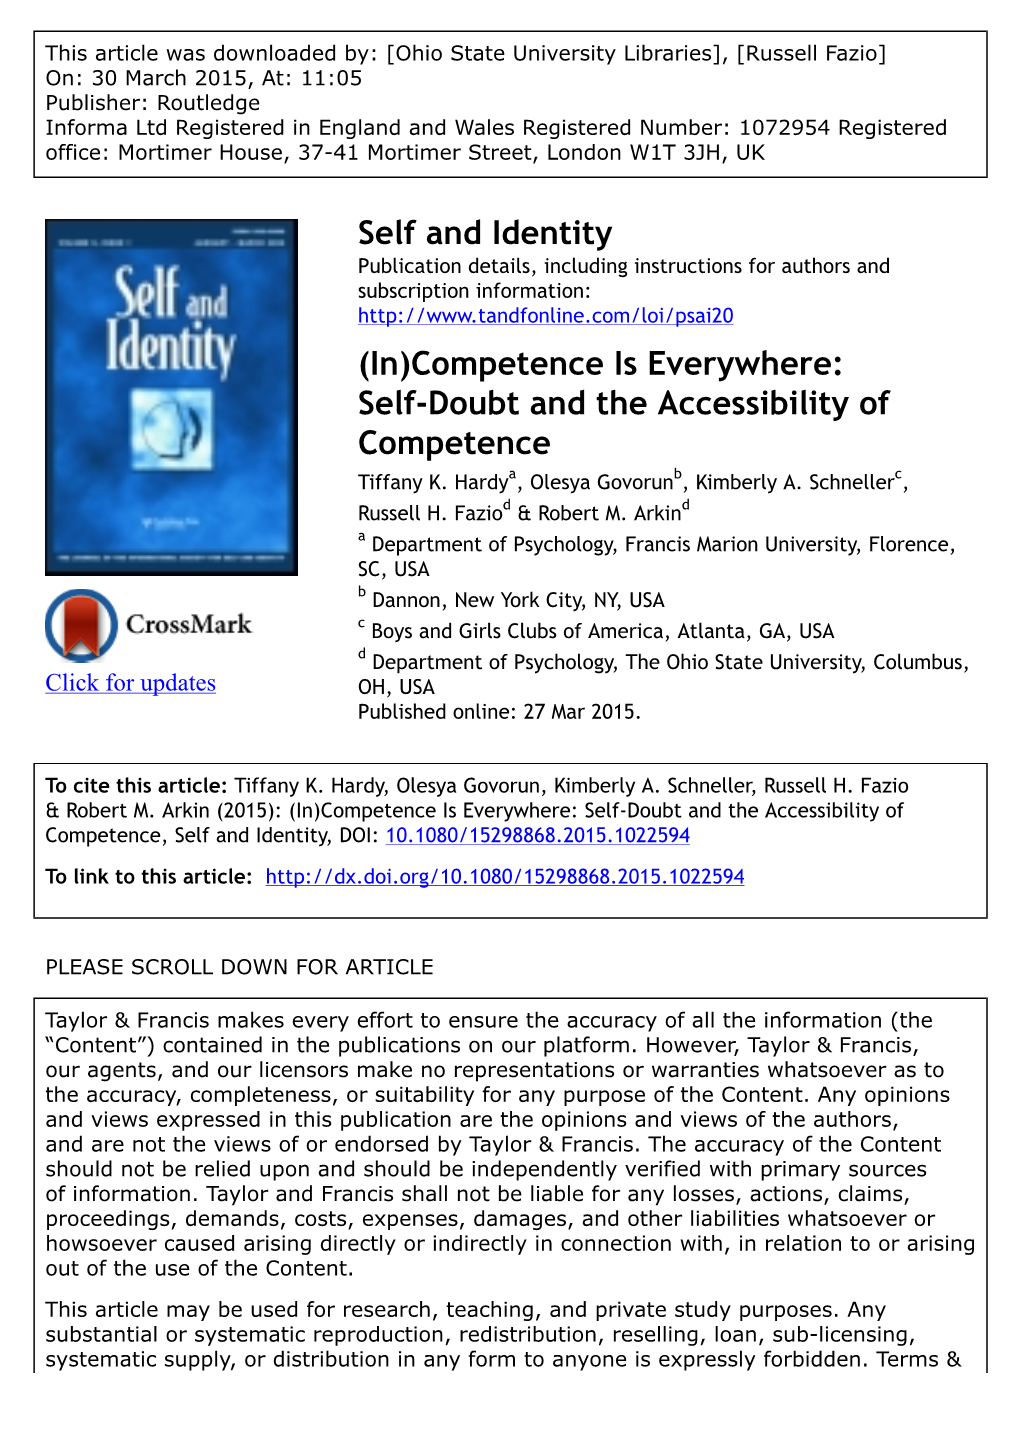 Self-Doubt and the Accessibility of Competence Tiffany K